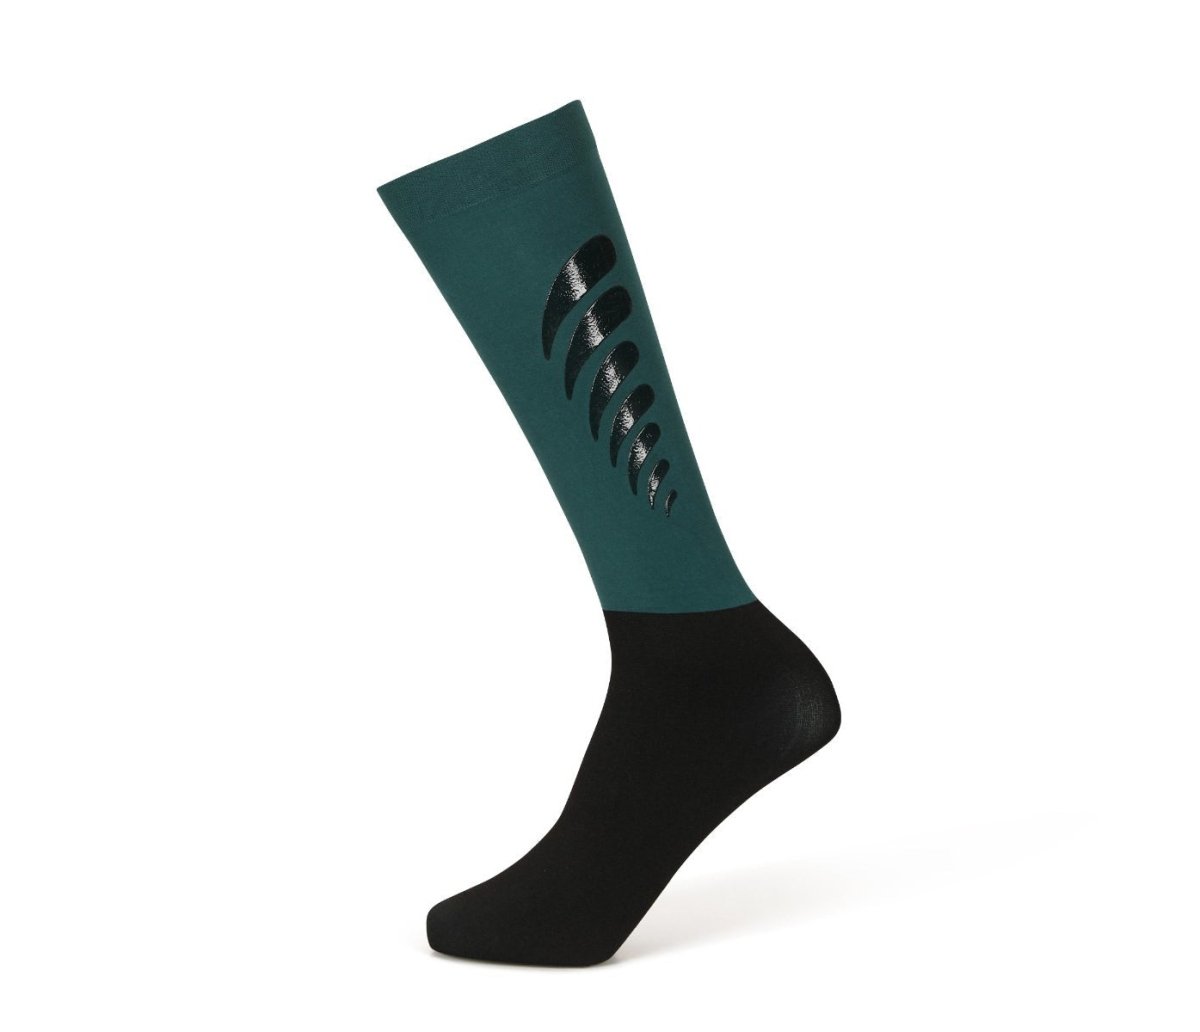 Aubrion SS24 Team Socks - Green - One Size